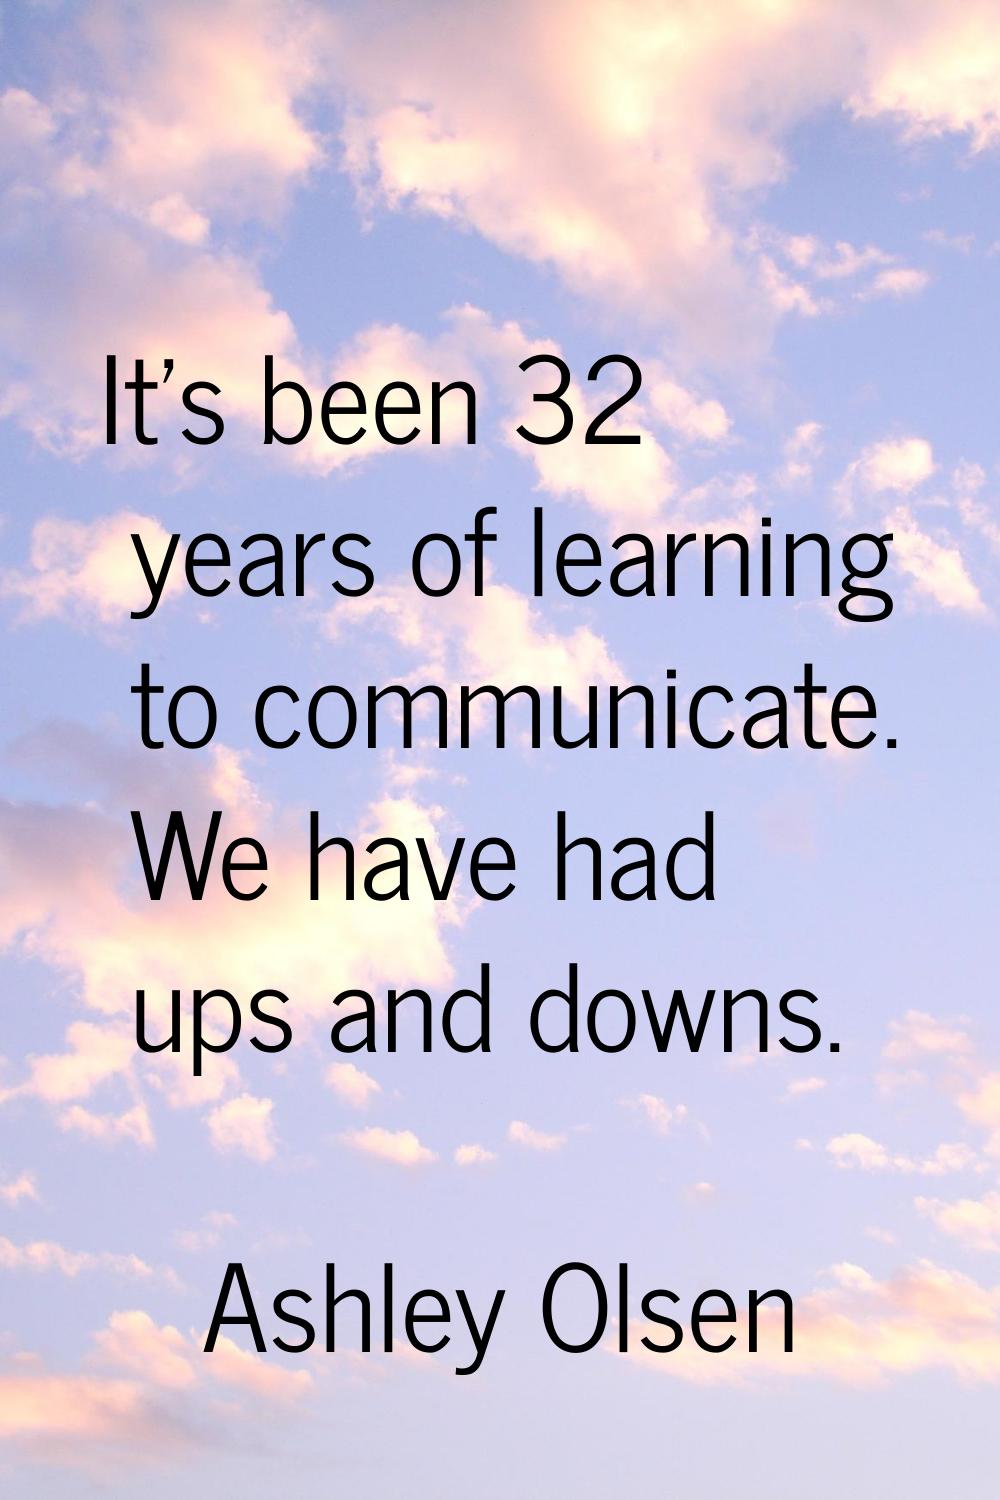 It's been 32 years of learning to communicate. We have had ups and downs.